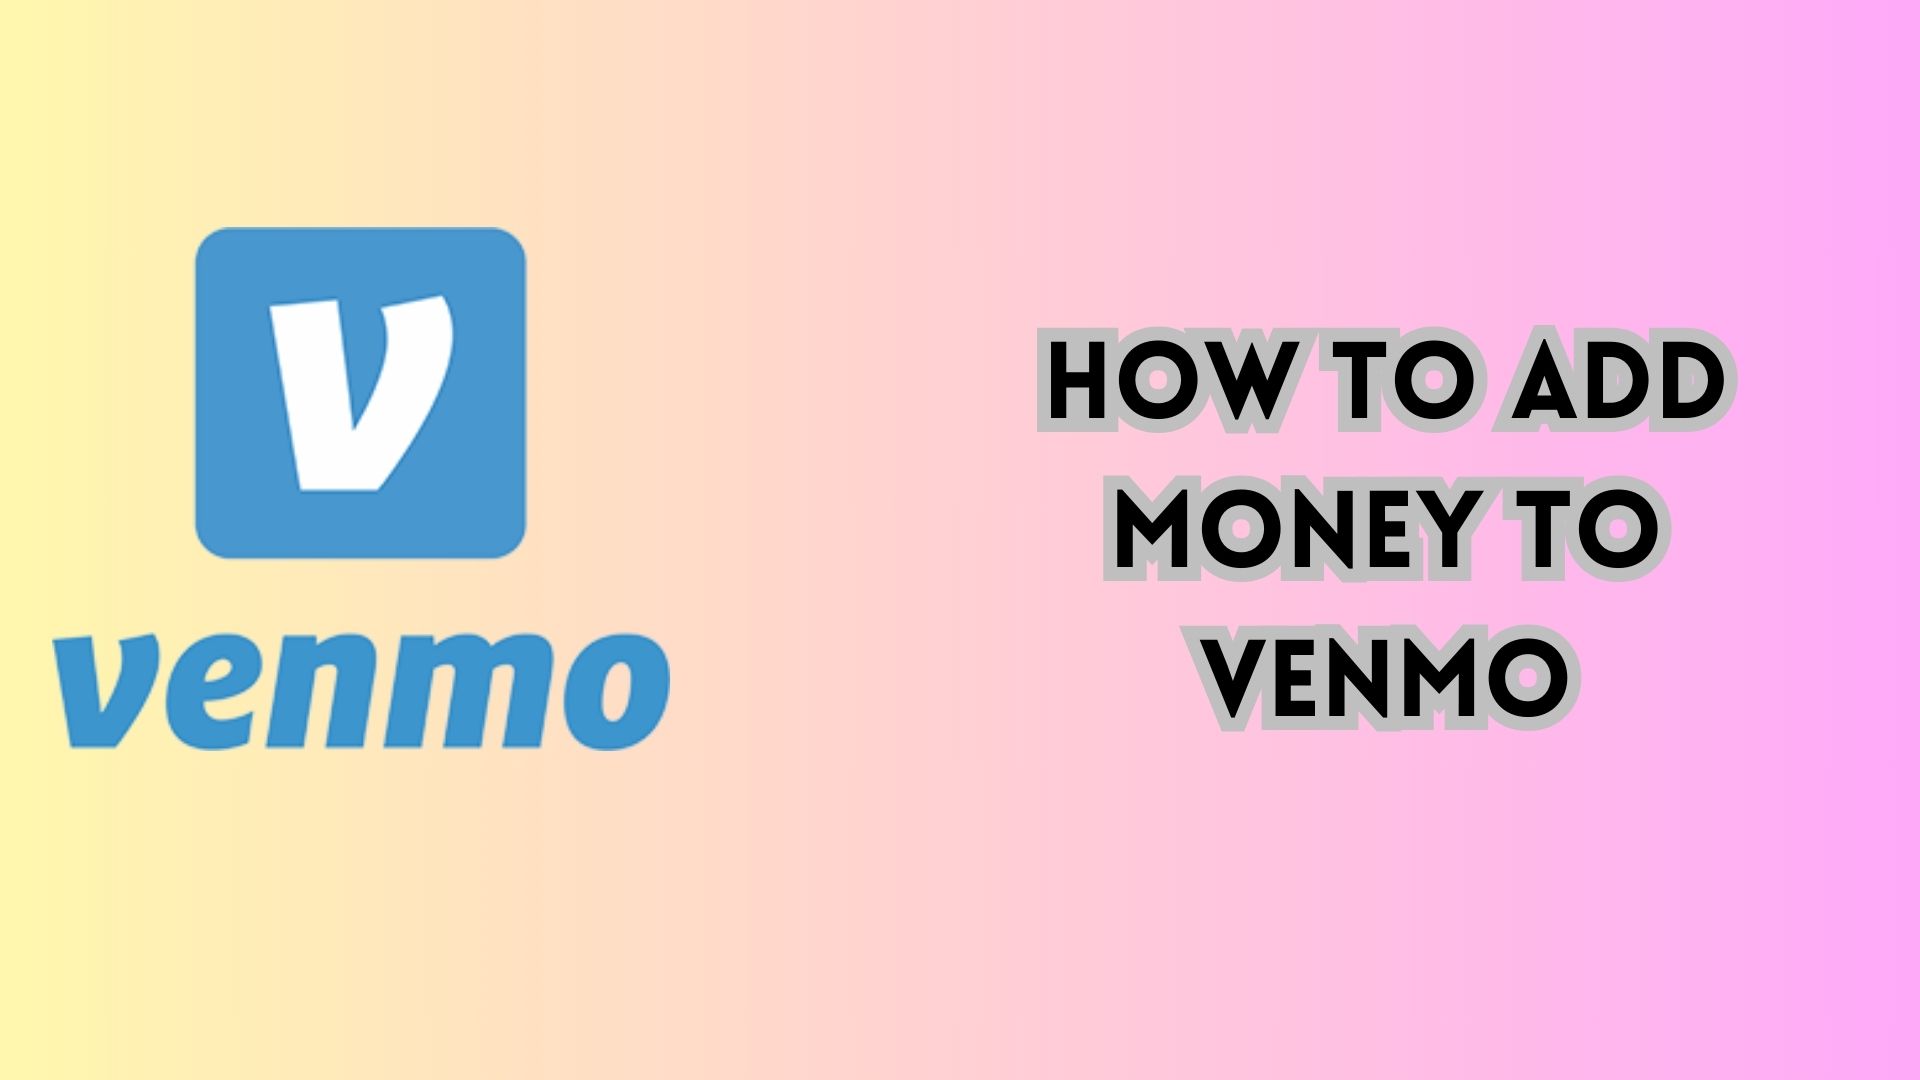 How to Add Money to Venmo.